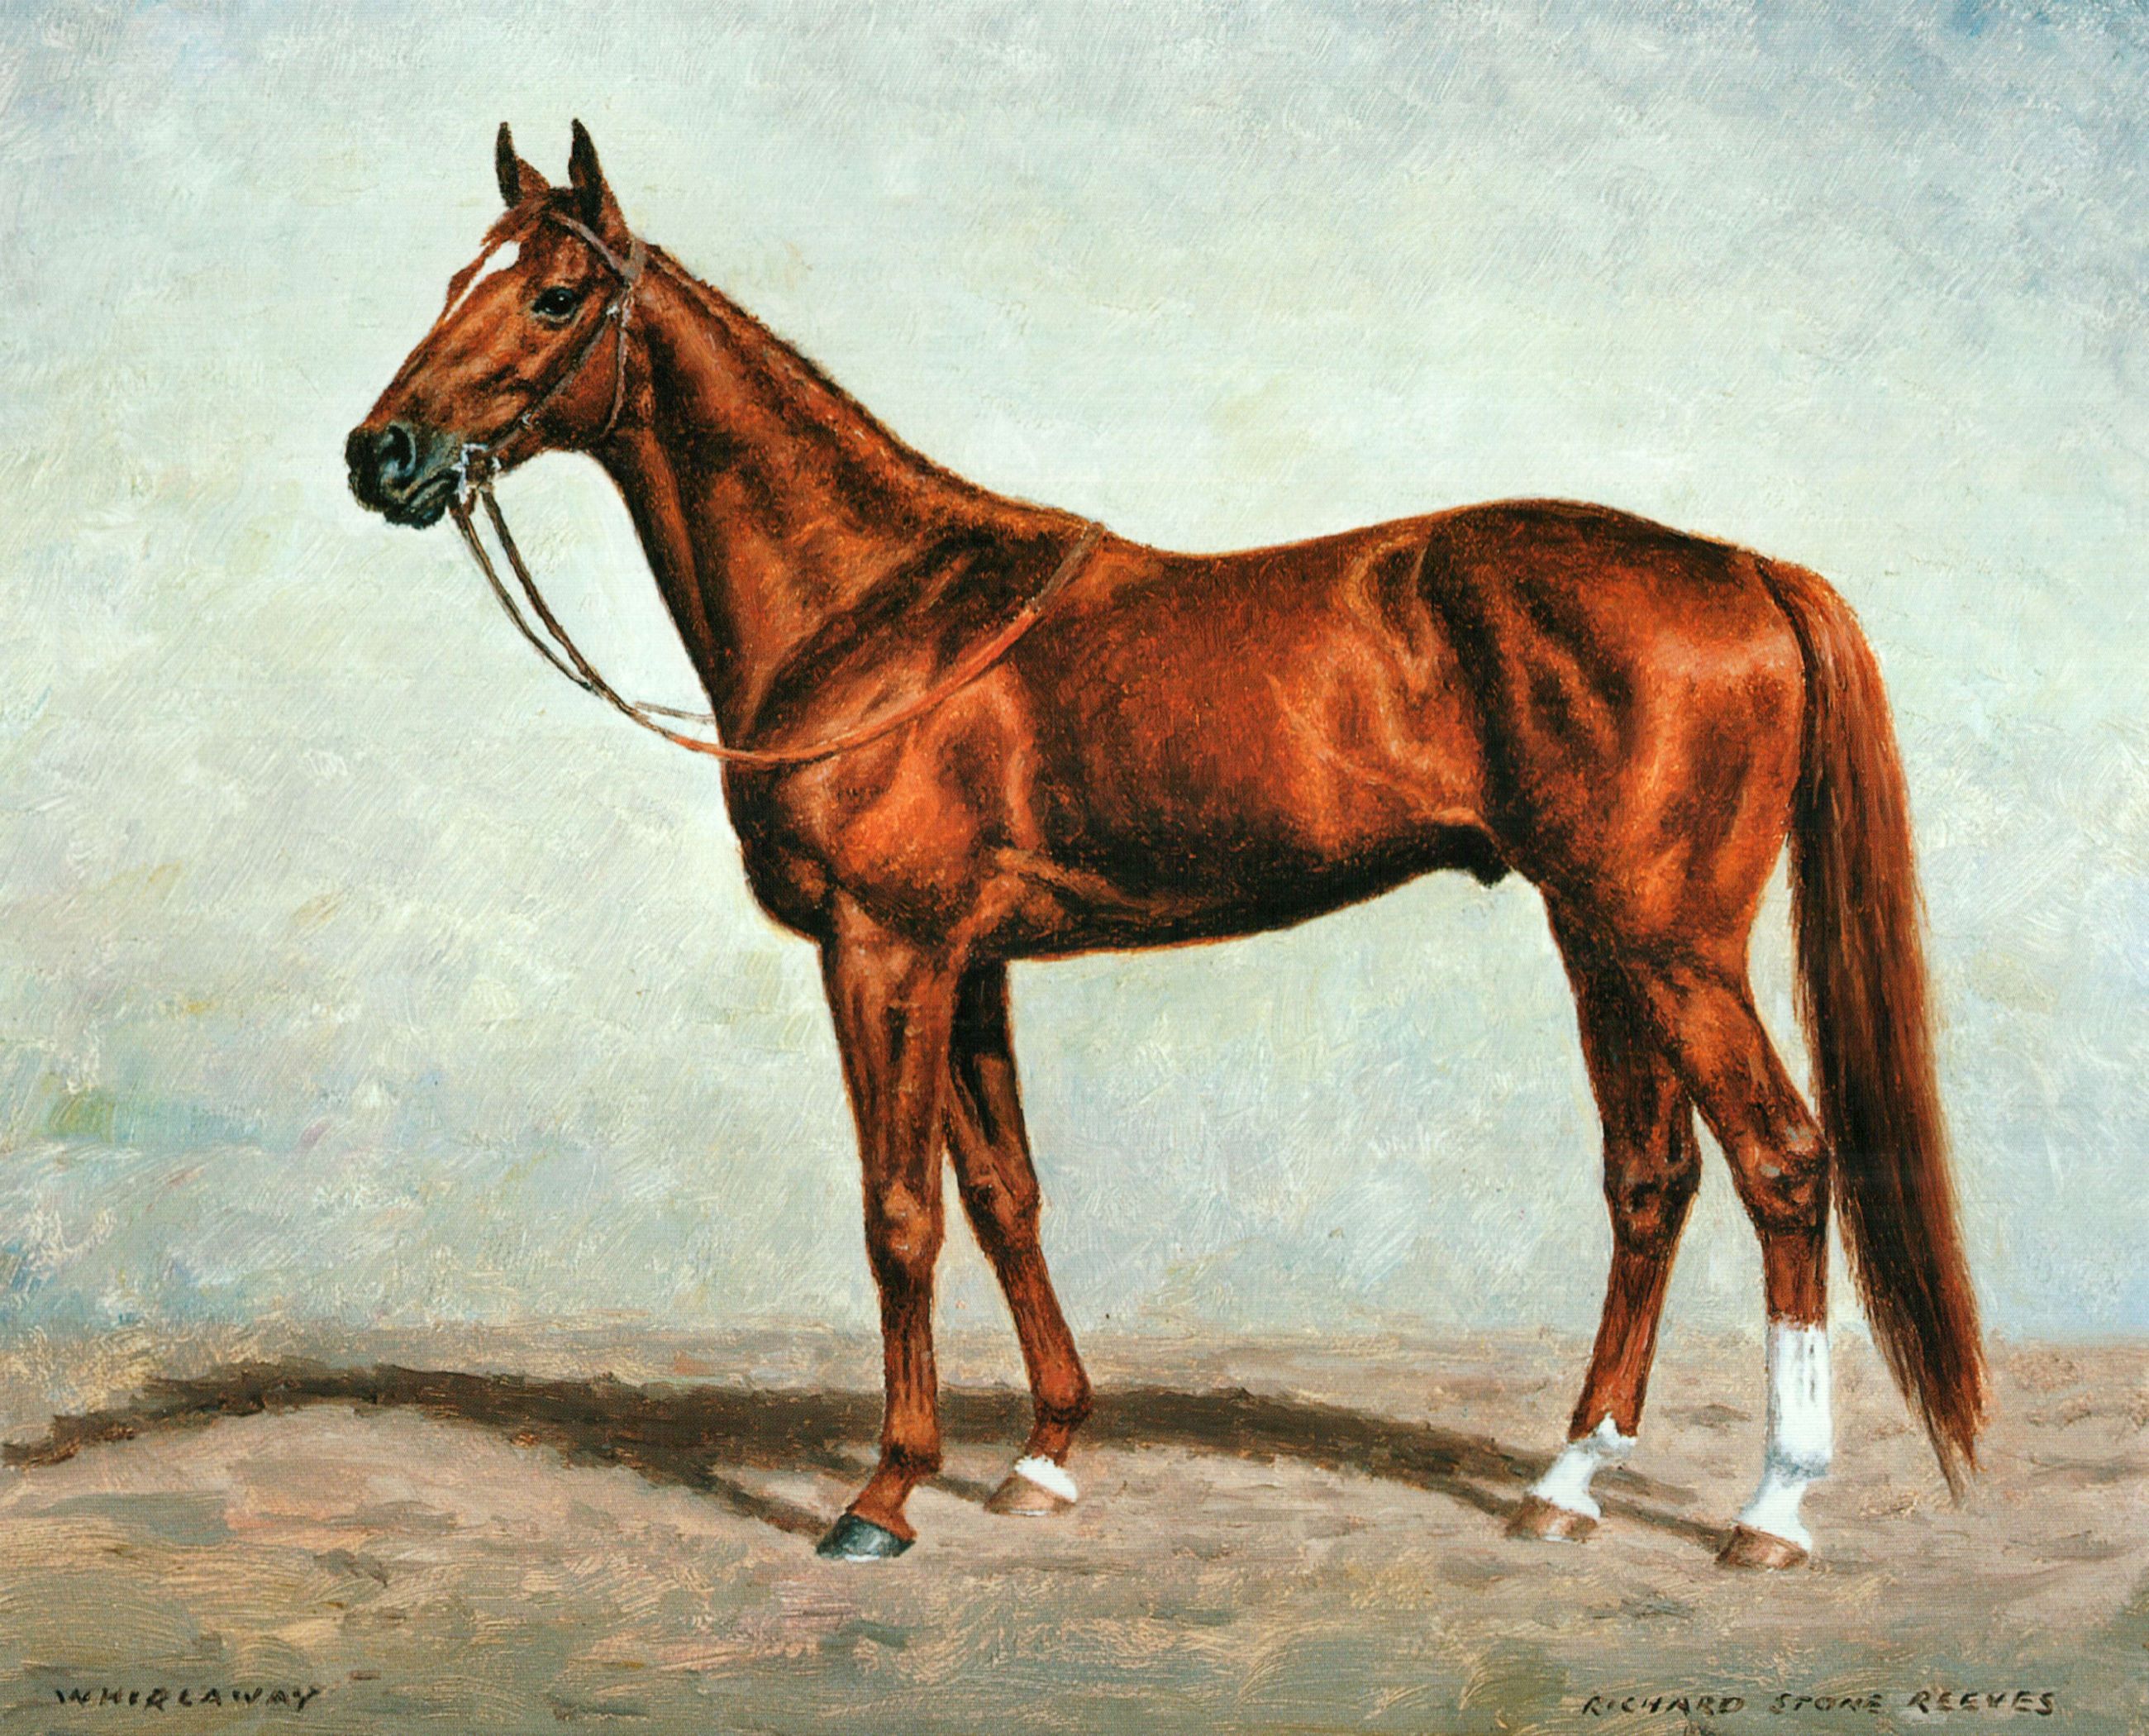 Painting of Whirlaway by Richard Stone Reeves